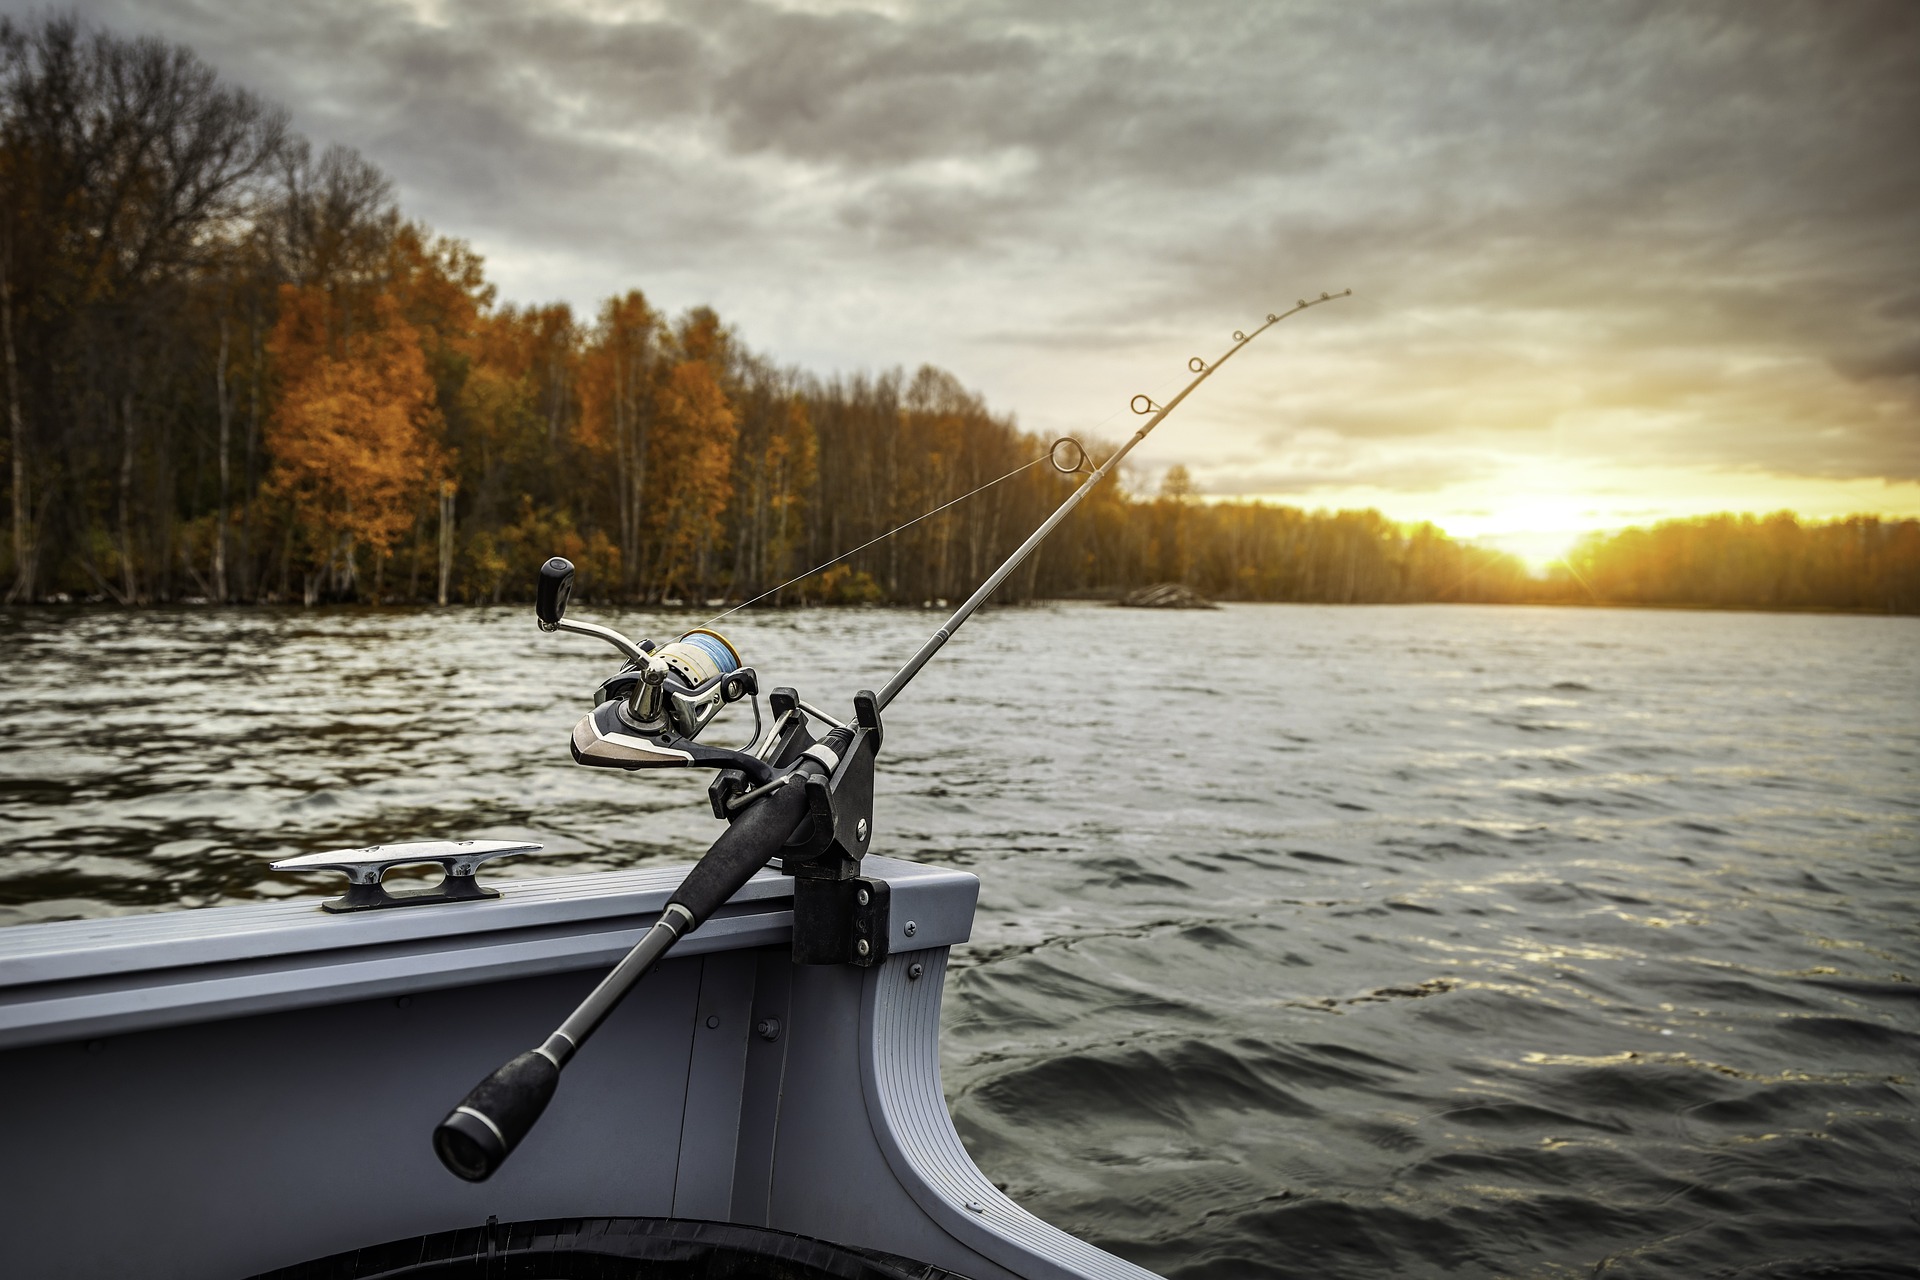 A fishing rod extends off a boat and over the river toward the sunrise on the horizon